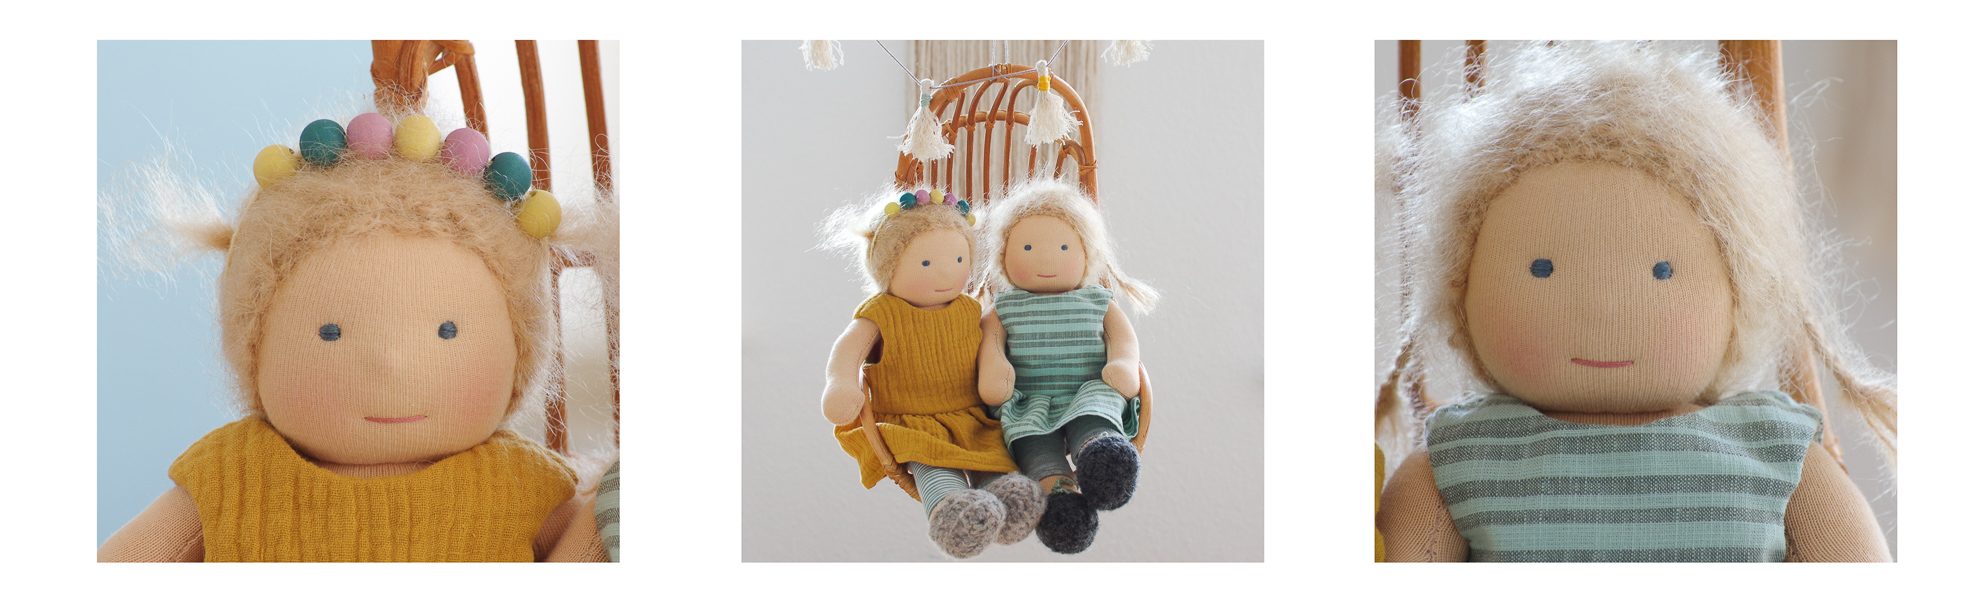 custom handmade dolls made from natural materials sitting in a lounge chair